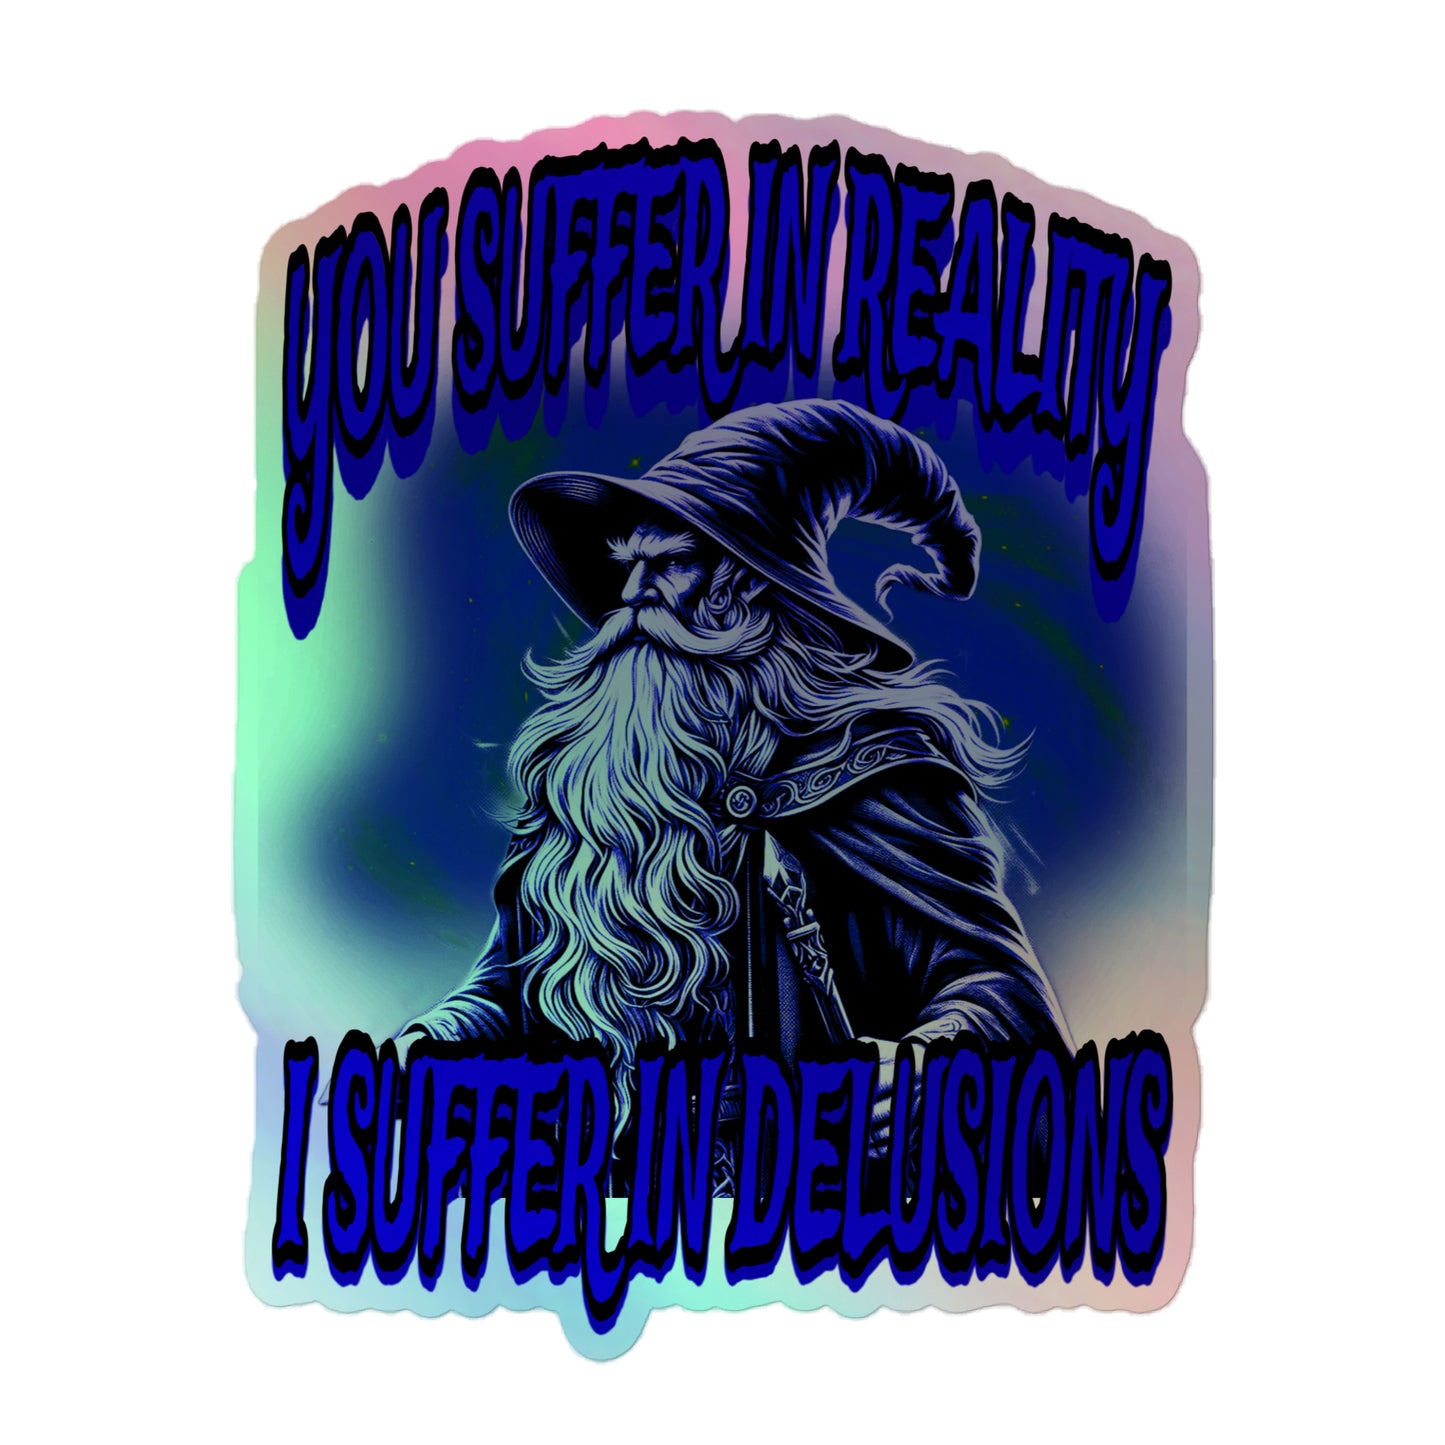 You suffer in reality (sticker)